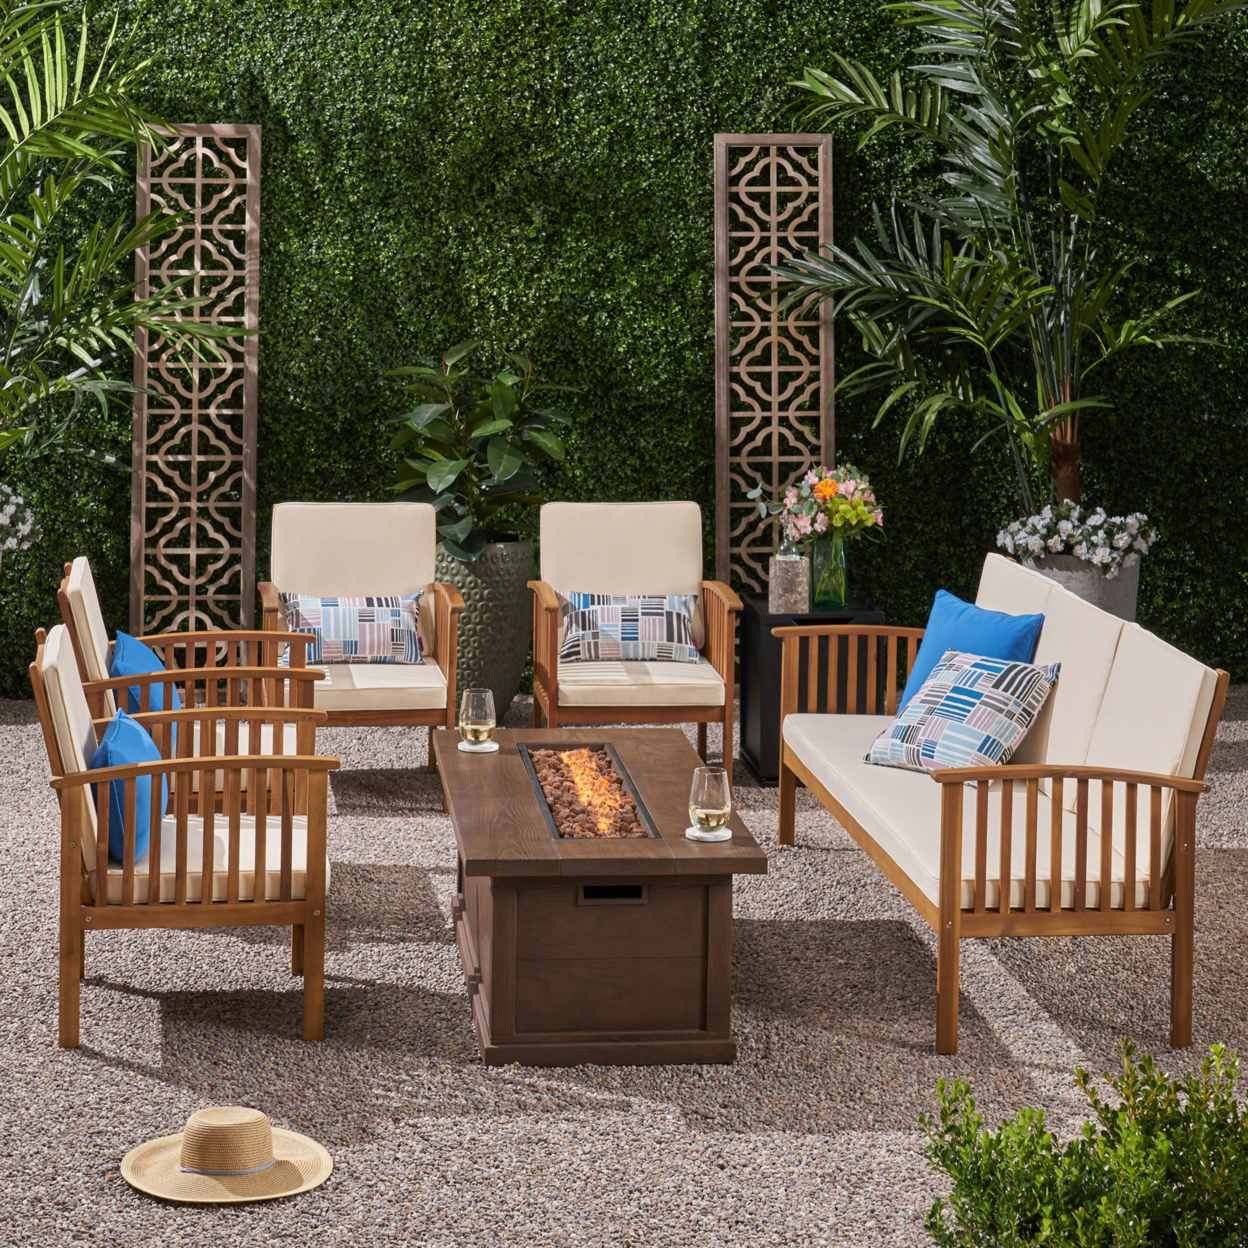 Suzanne Sophia Outdoor 7 Piece Acacia Wood Chat Set With Fire Pit - Teak Finish, Cream, Brown